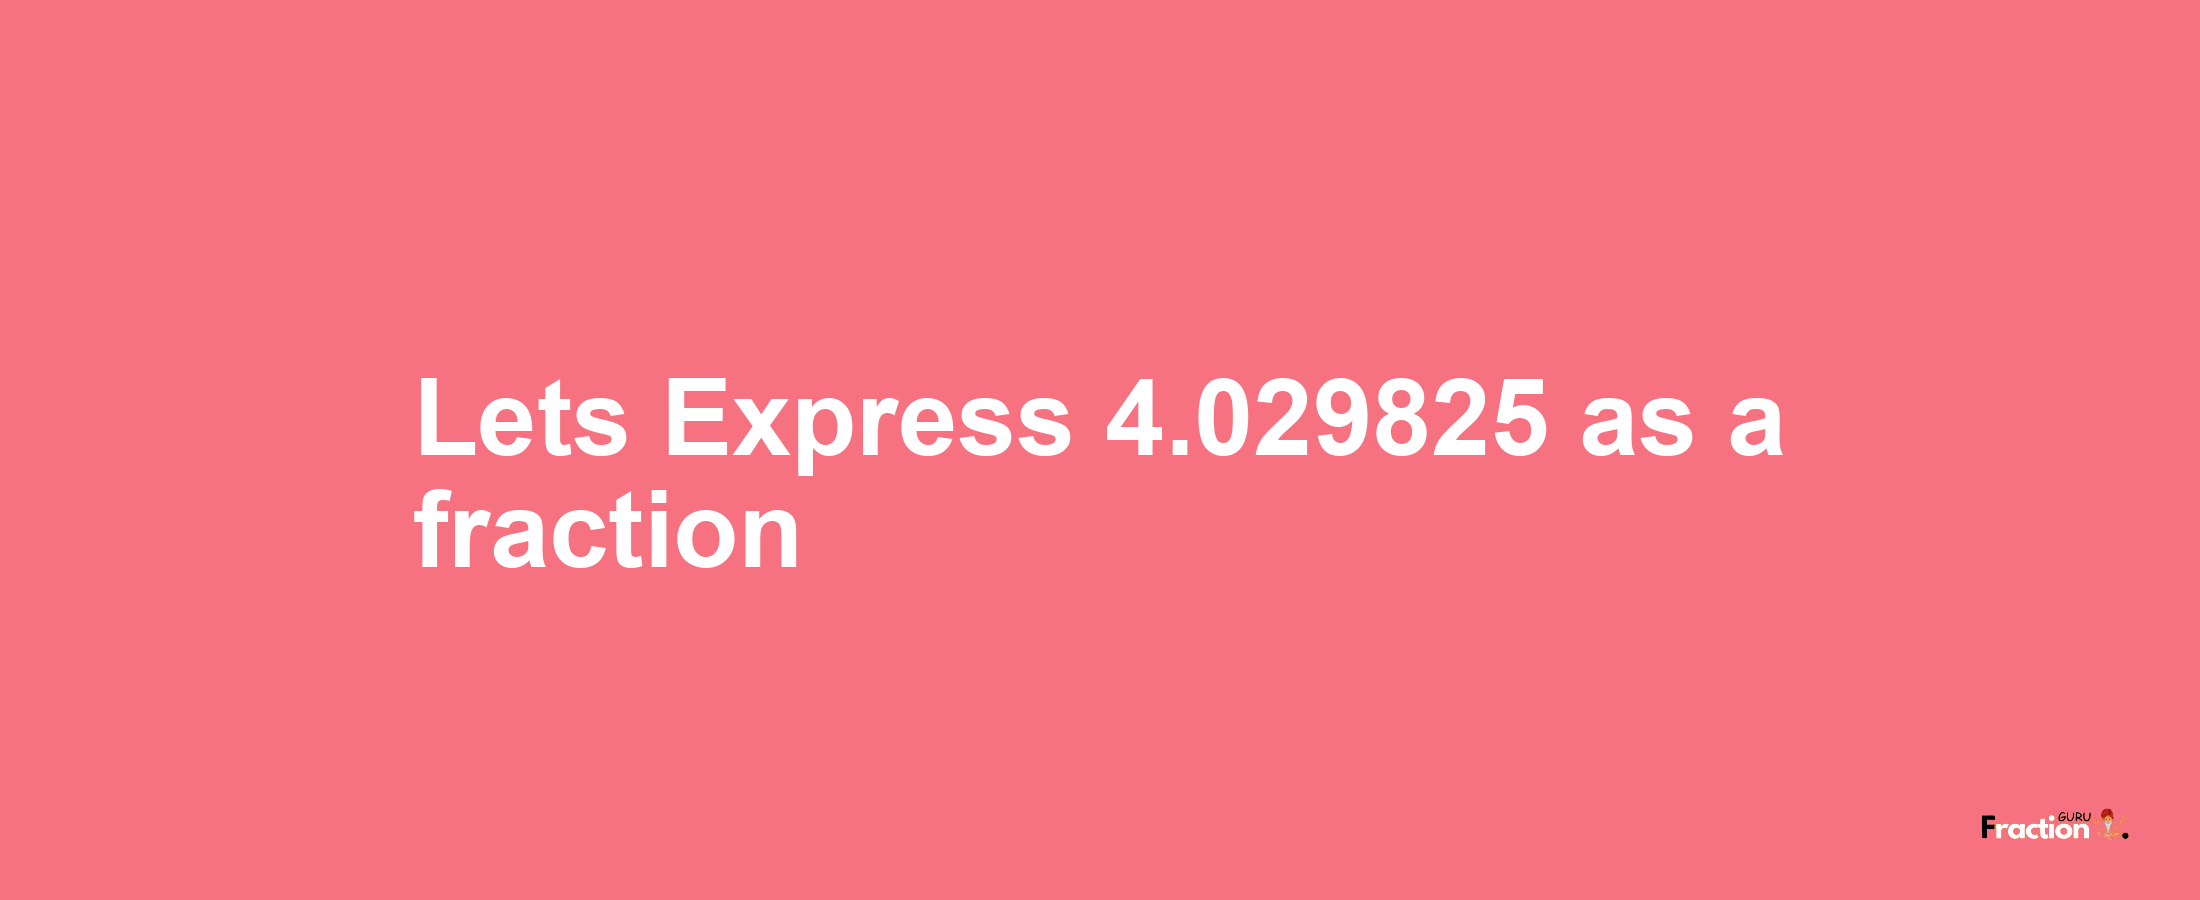 Lets Express 4.029825 as afraction